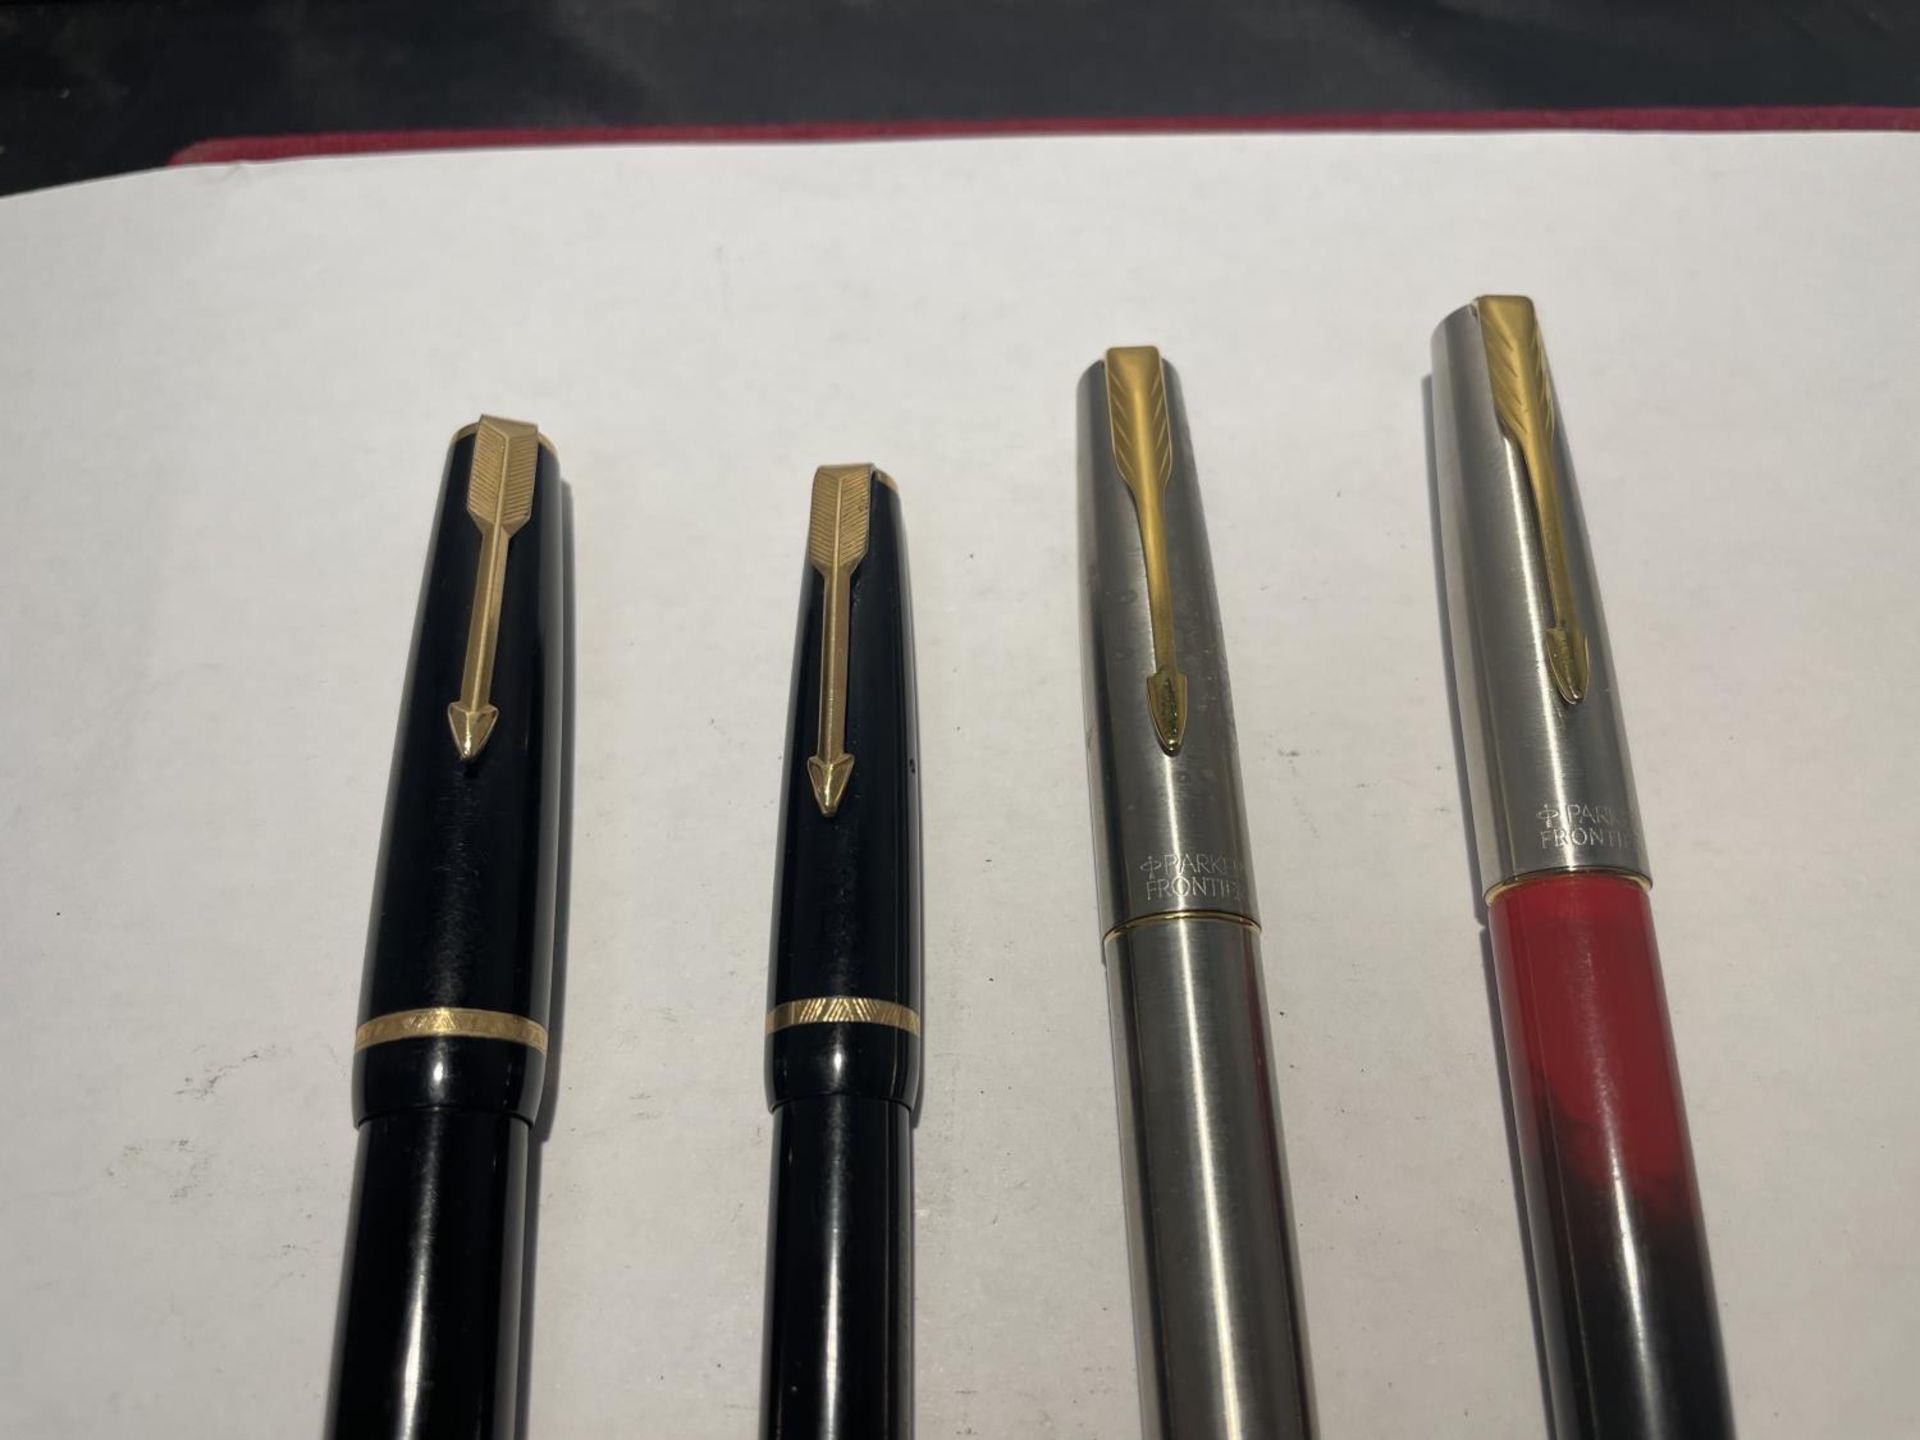 FOUR VINTAGE PARKER FOUNTAIN PENS - TWO WITH 14 CARAT GOLD NIBS - Image 2 of 3